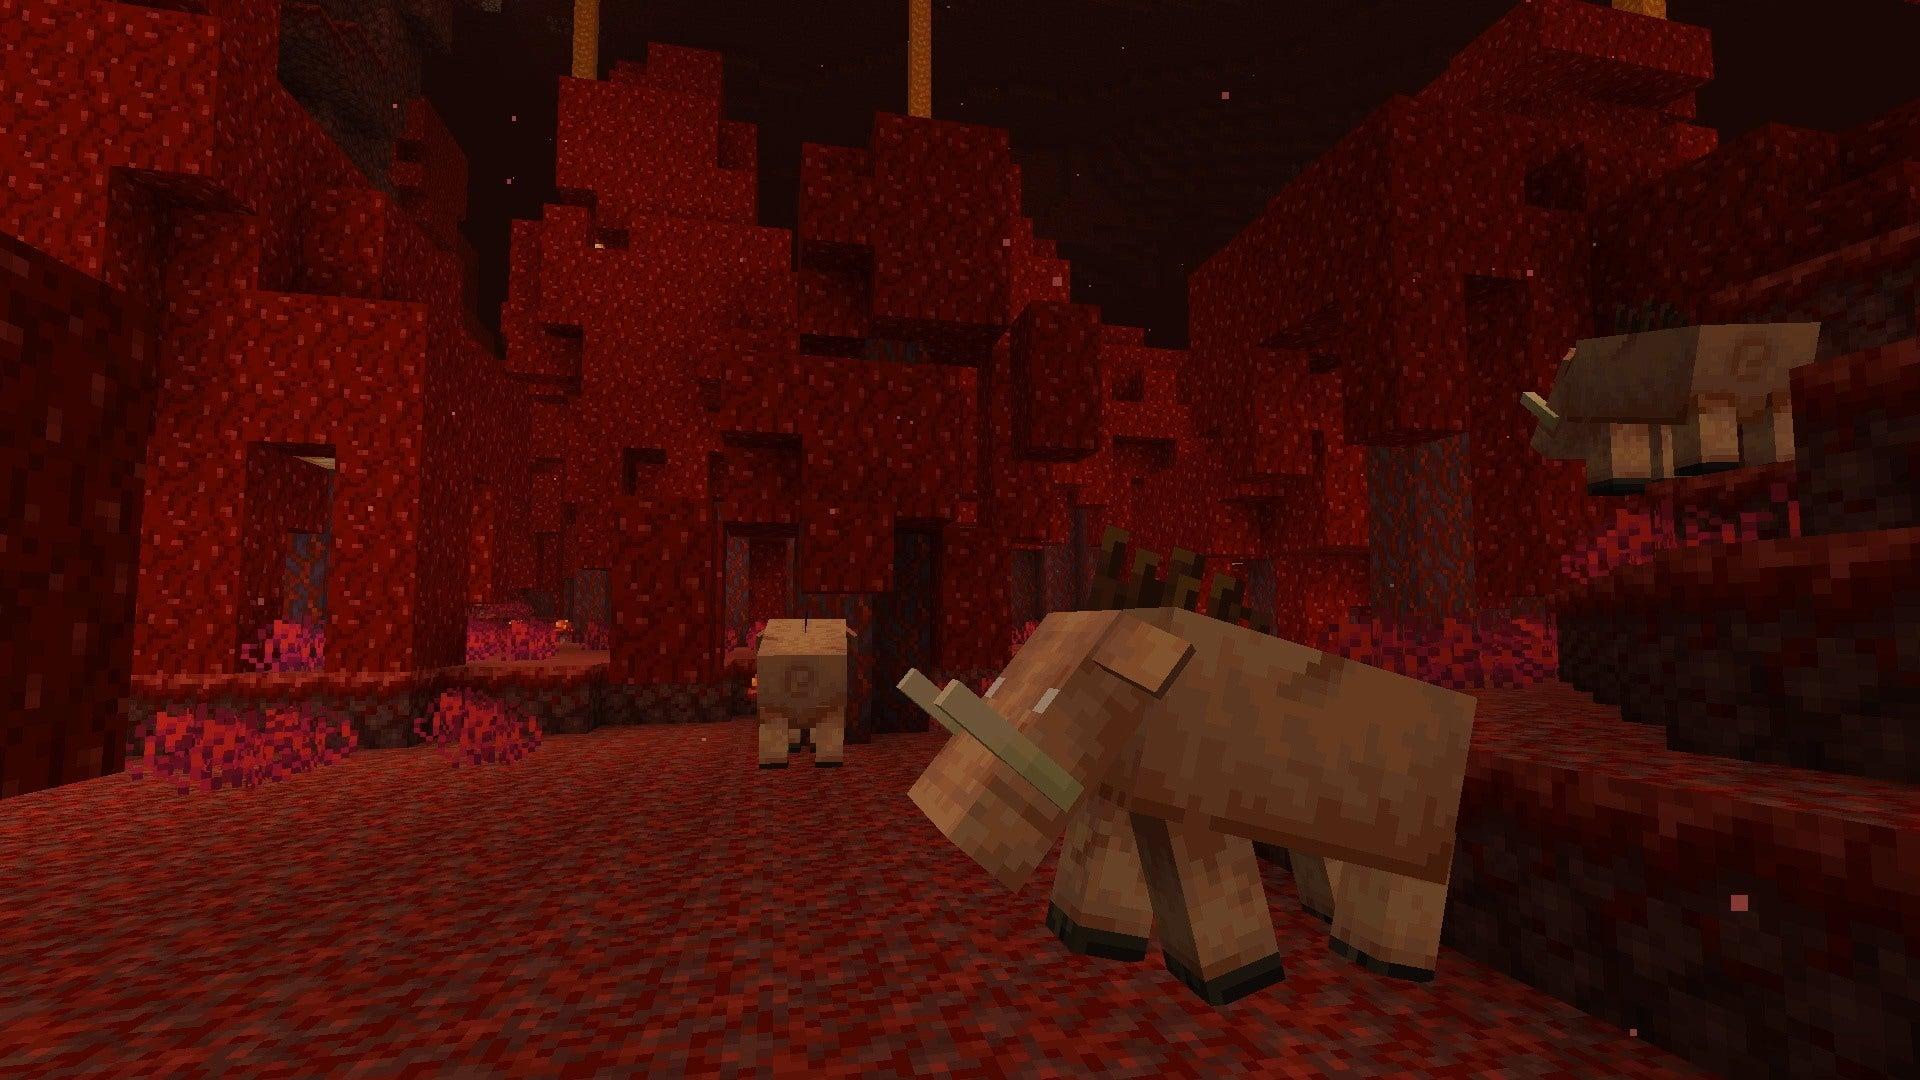 Two Minecraft Hoglin in the Nether.